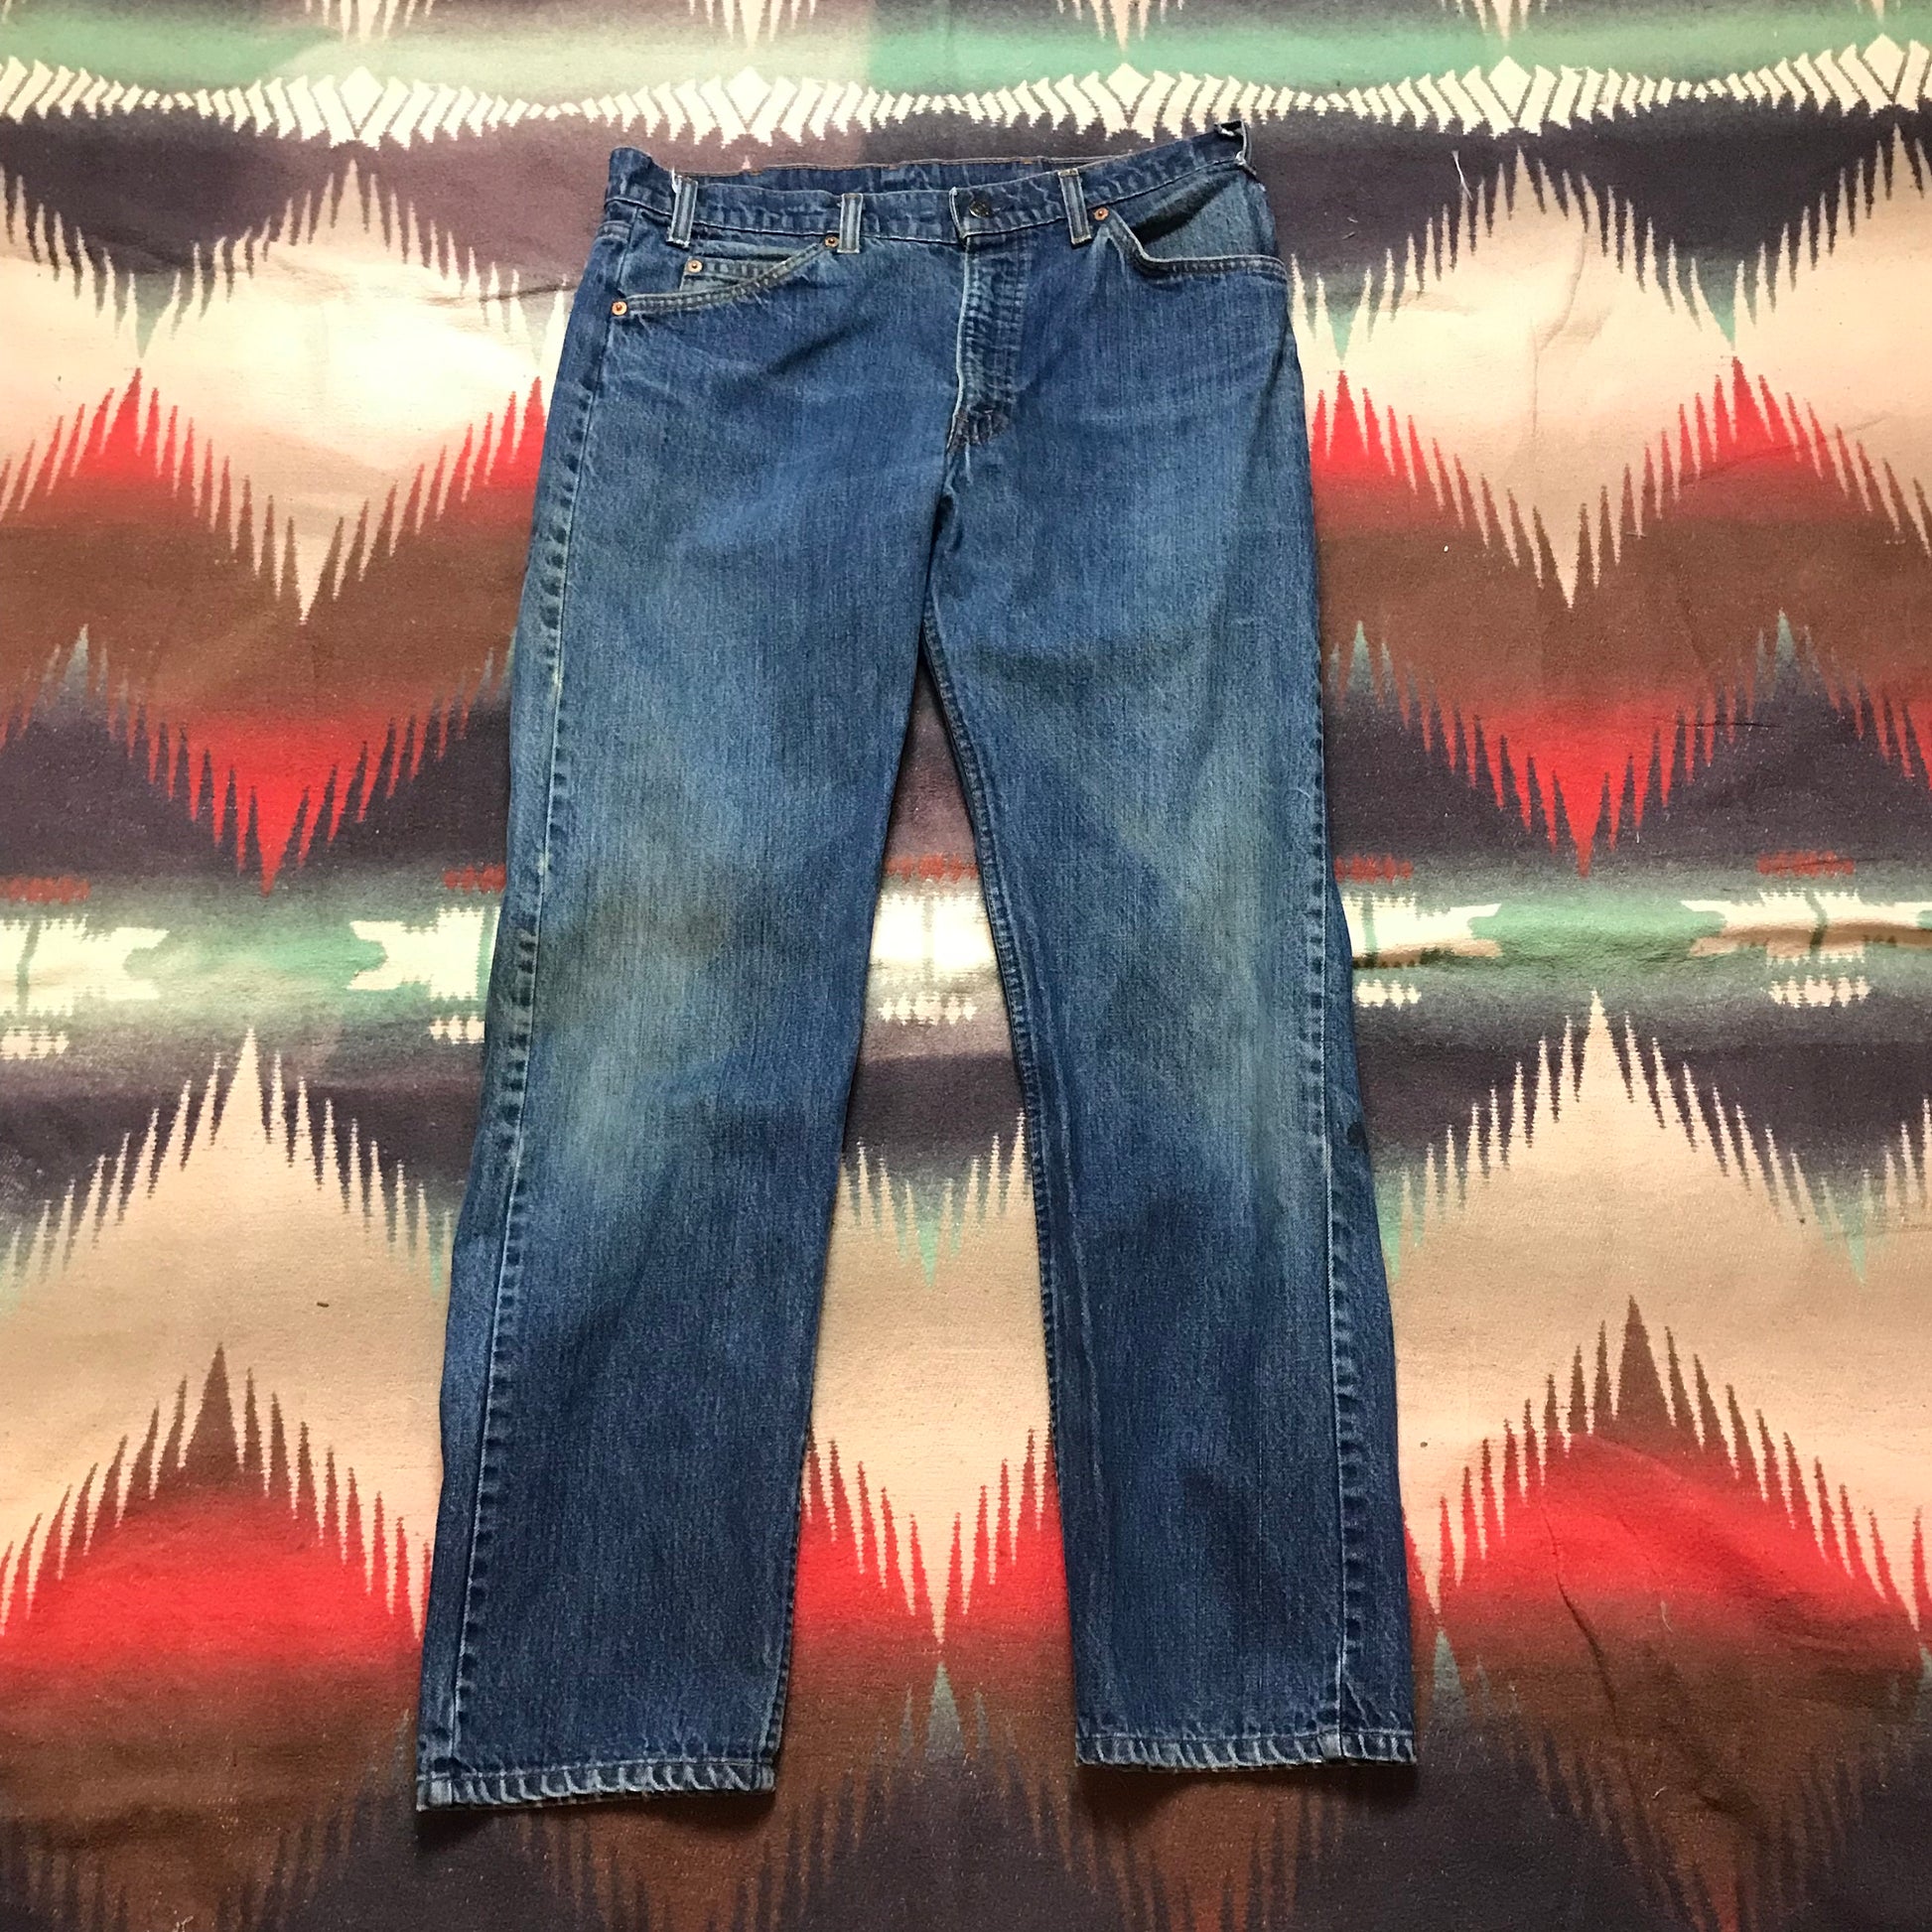 1970s Repaired Orange Tab Levi's 505 Jeans Made in USA Size 33x29